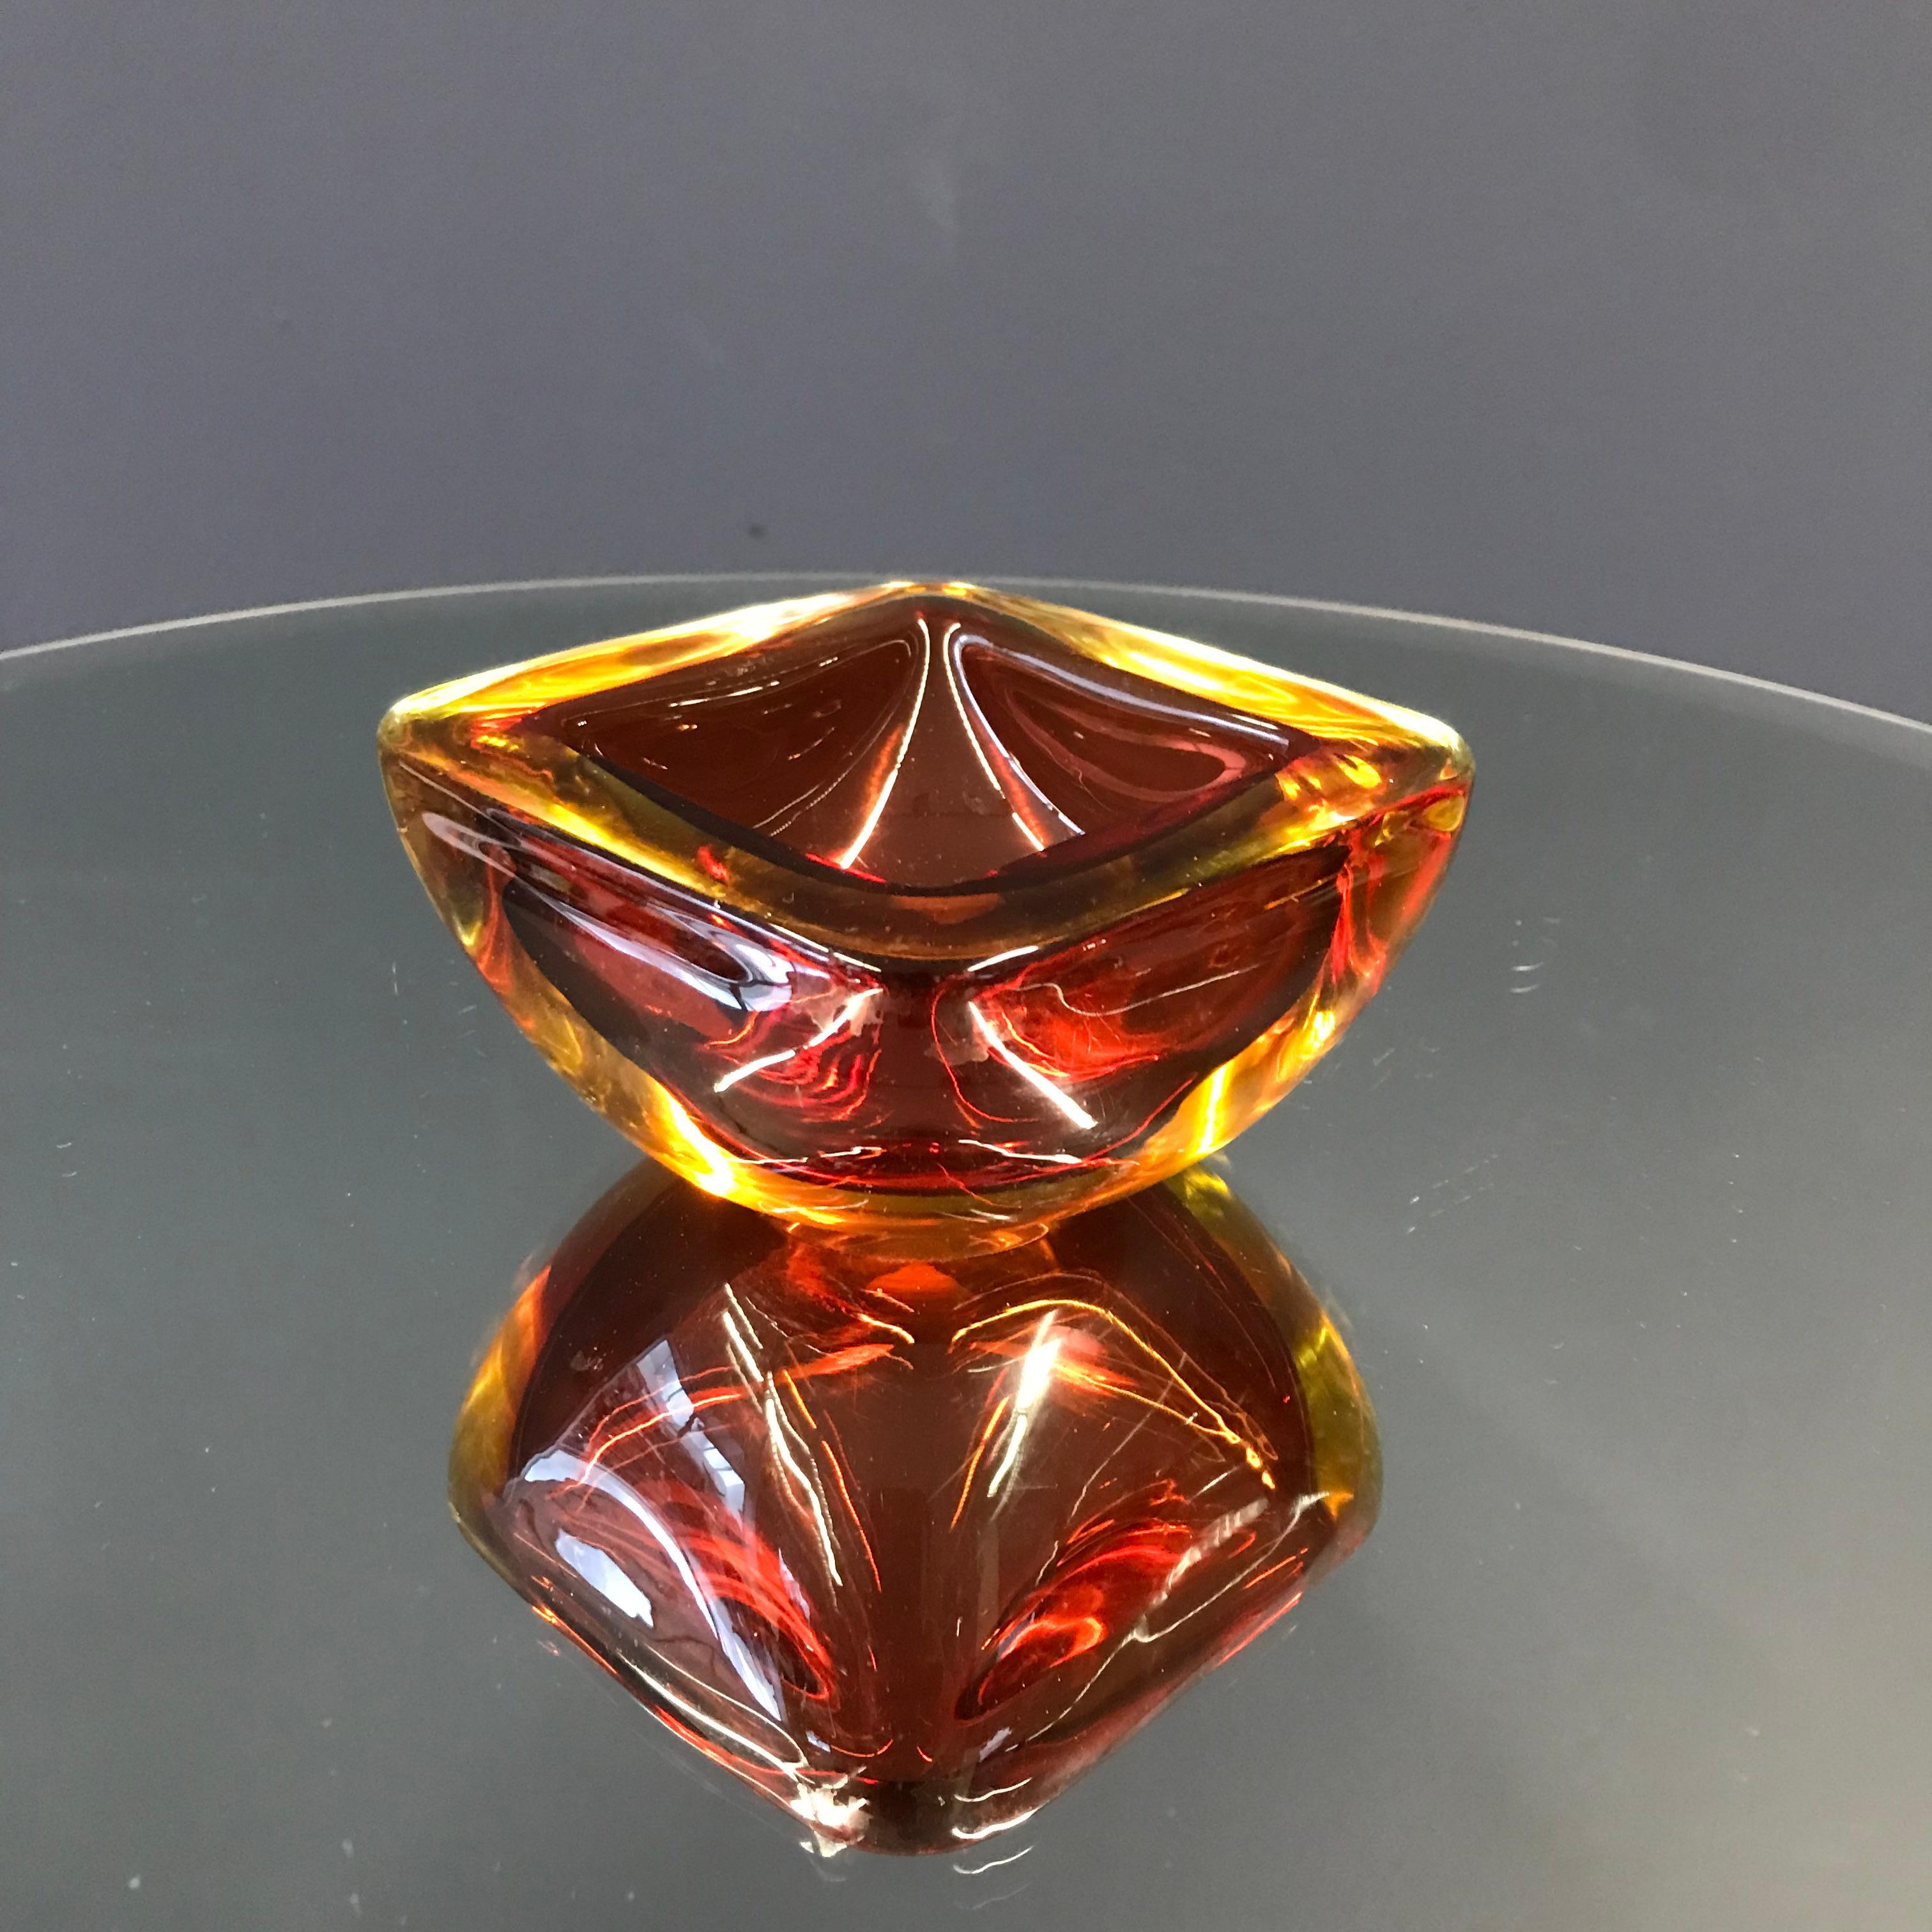 Add a bold pop of color to your smoking space with our vibrant red-orange ashtray—a stylish and functional accent piece designed to stand out.